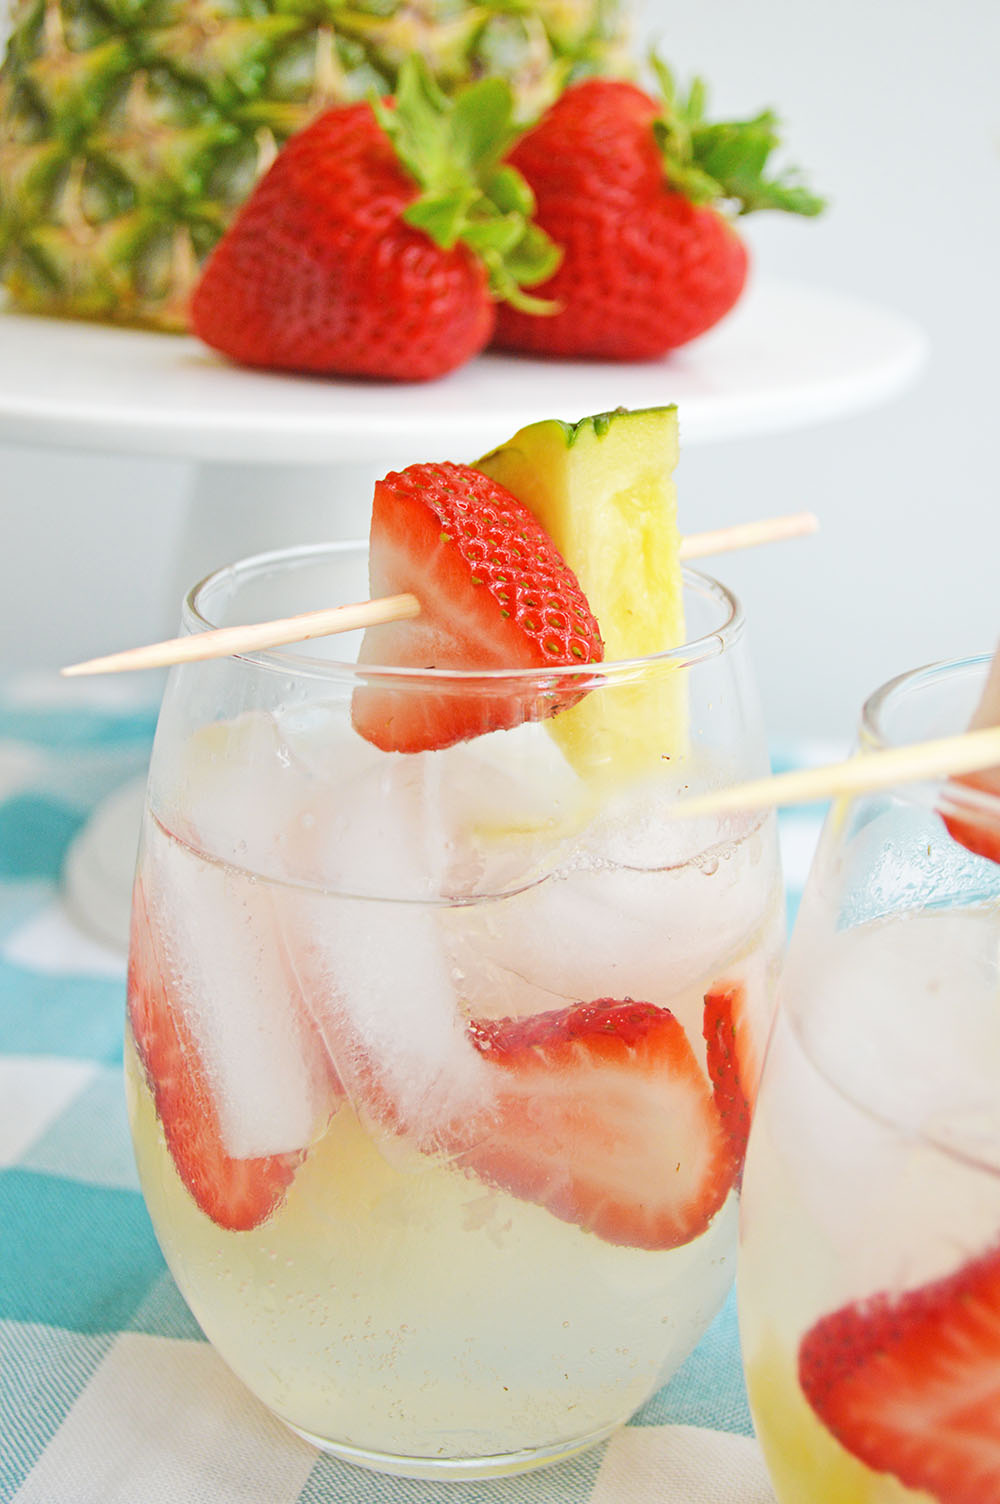 Strawberry pineapple sangria recipe for summer